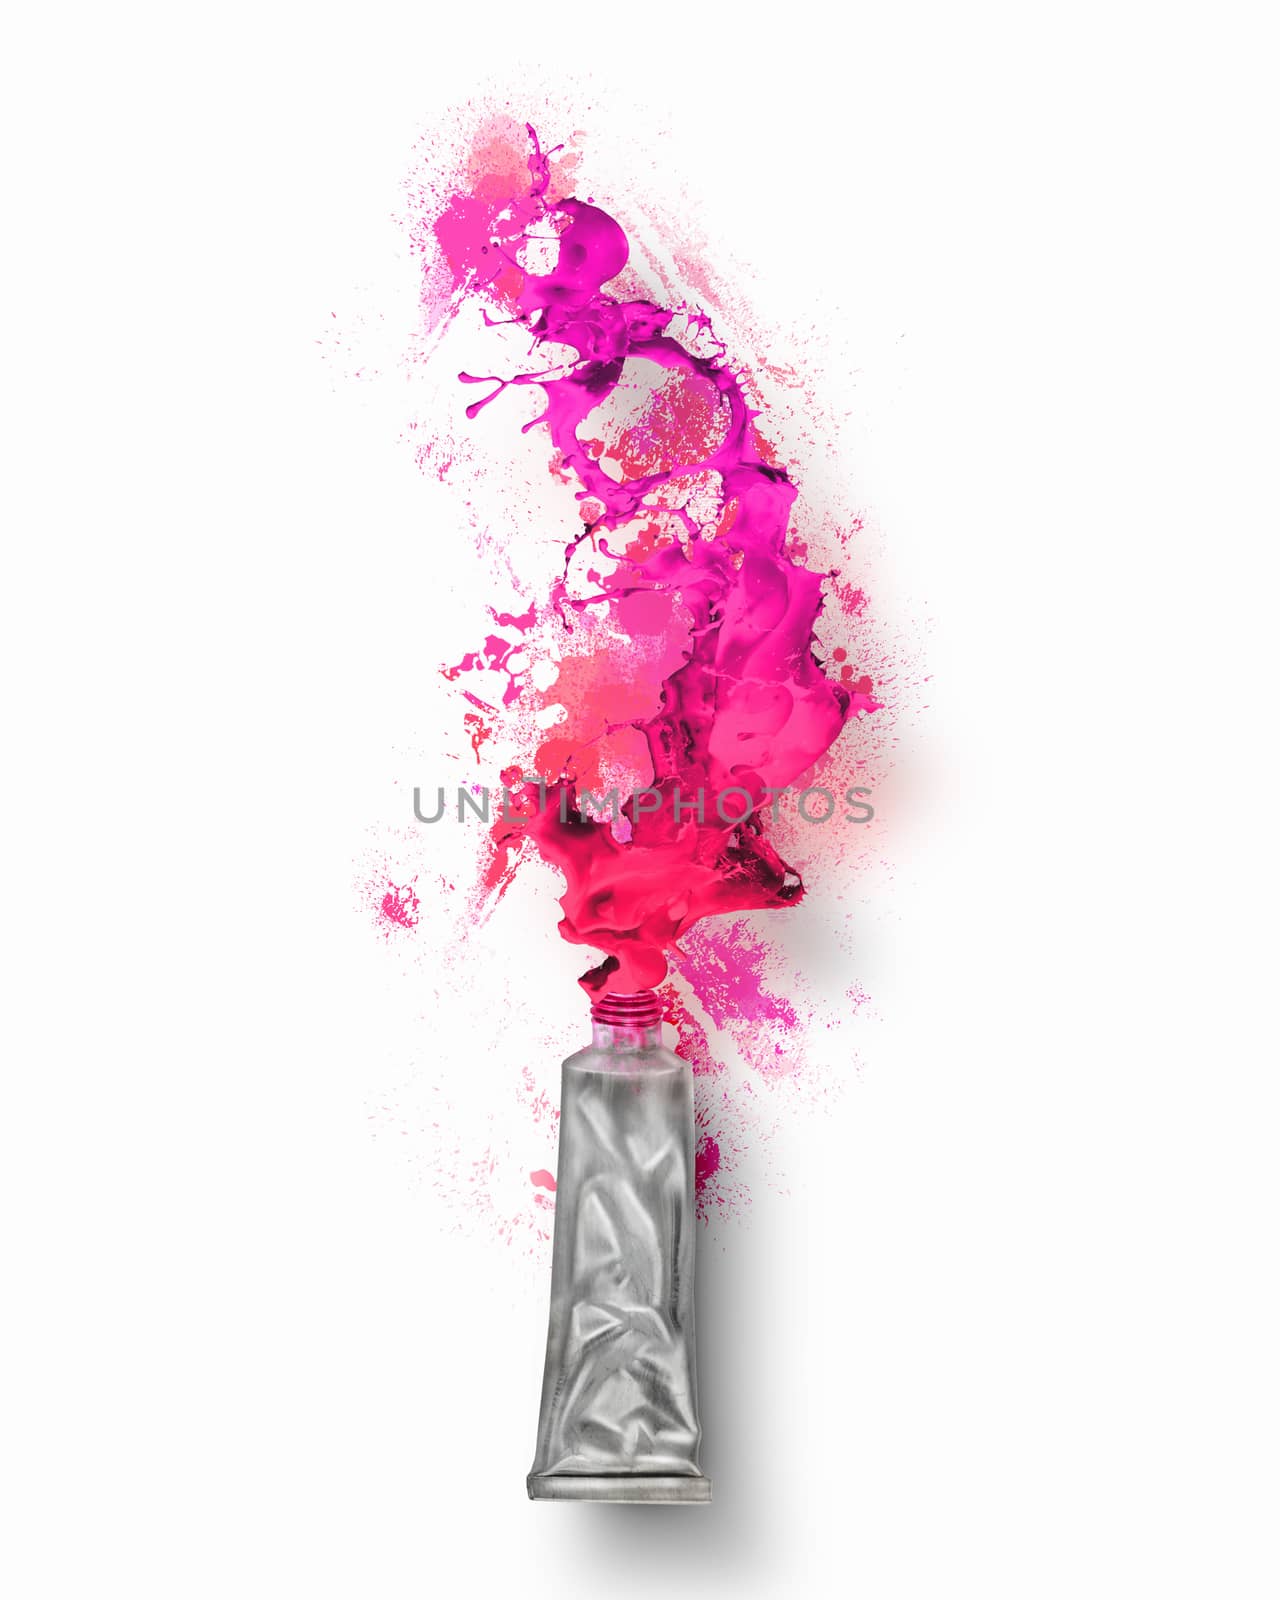 Image of paint tube with color splashes